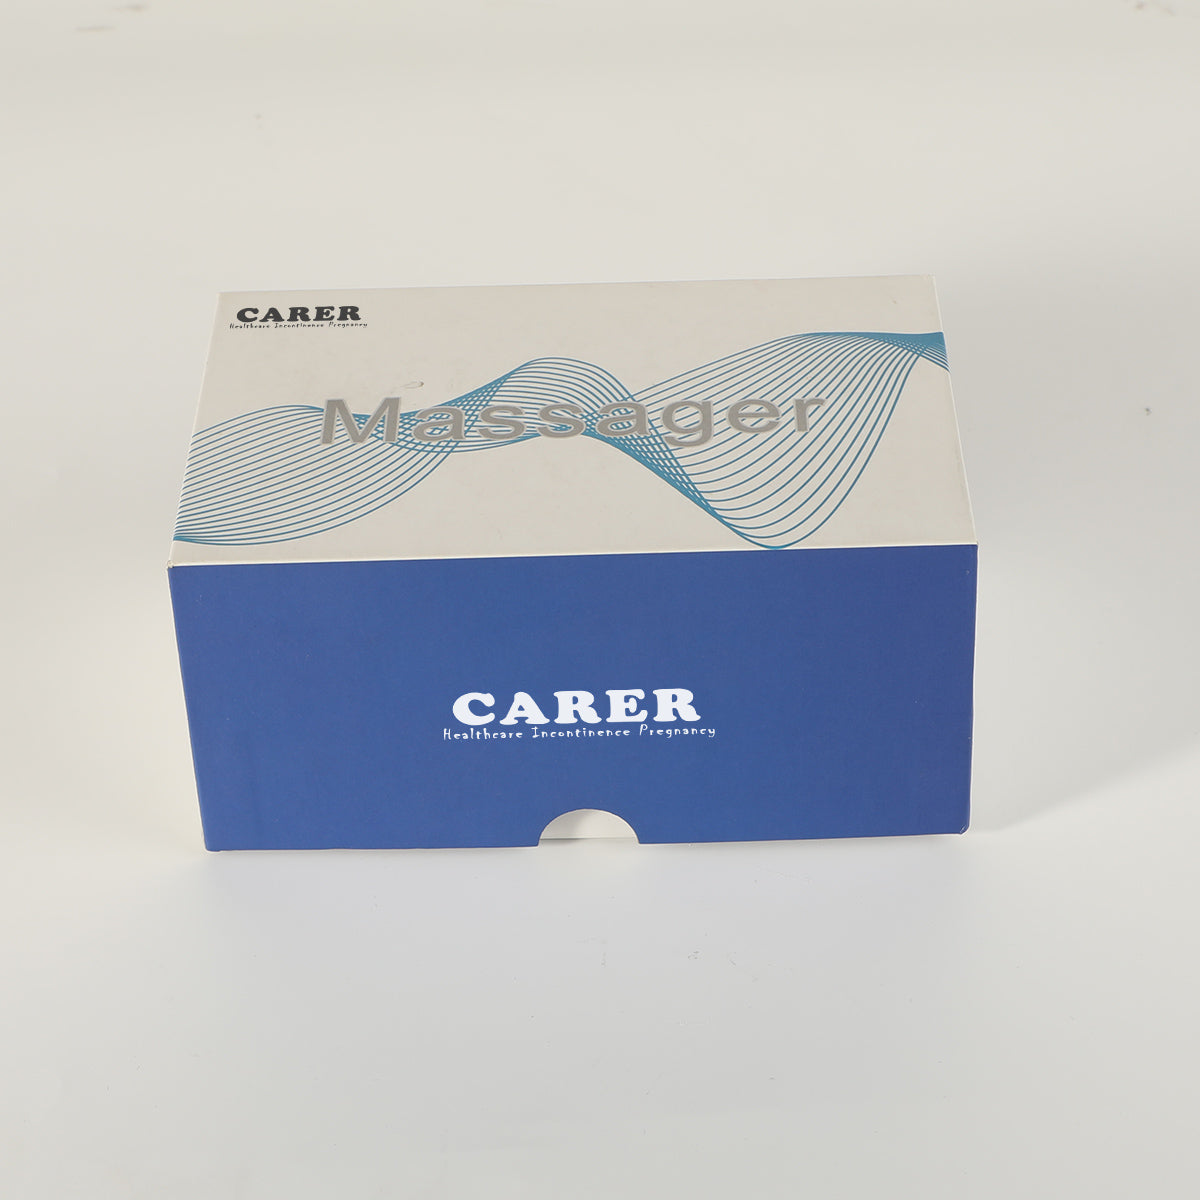 CARER Healthcare Incontinence Pregnancy Electronic stimulation apparatus for nerves, skin, muscles for physical therapy purposes